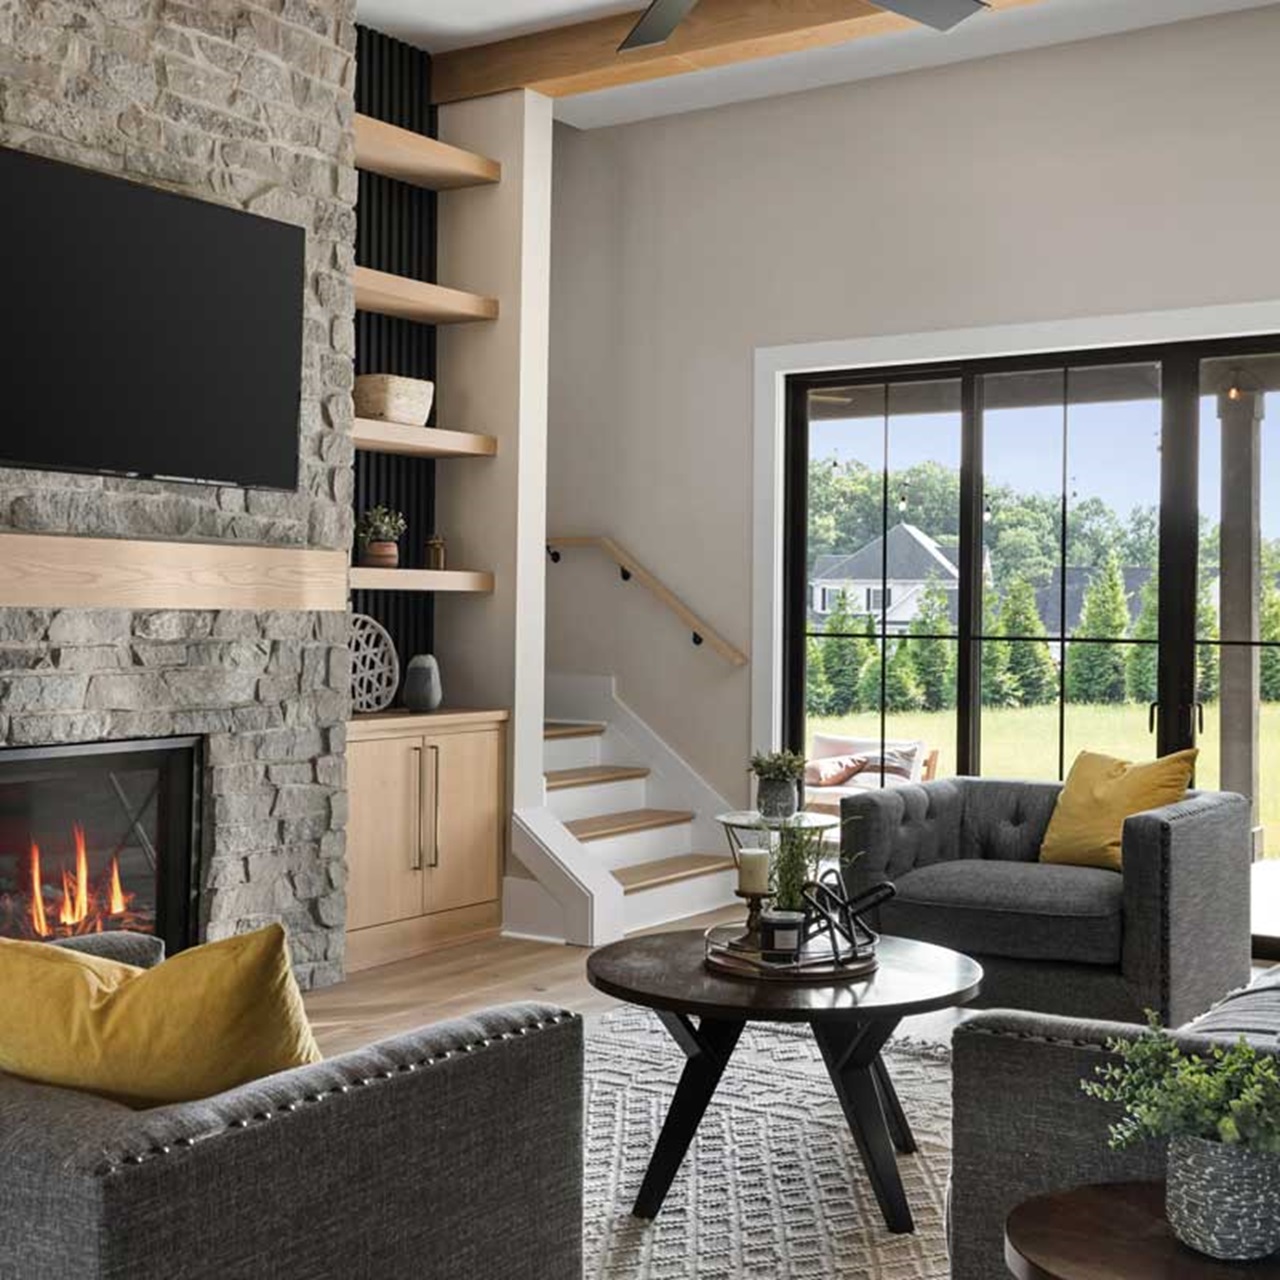 Living room with stone fireplace with seating and view out black sliding patio doors